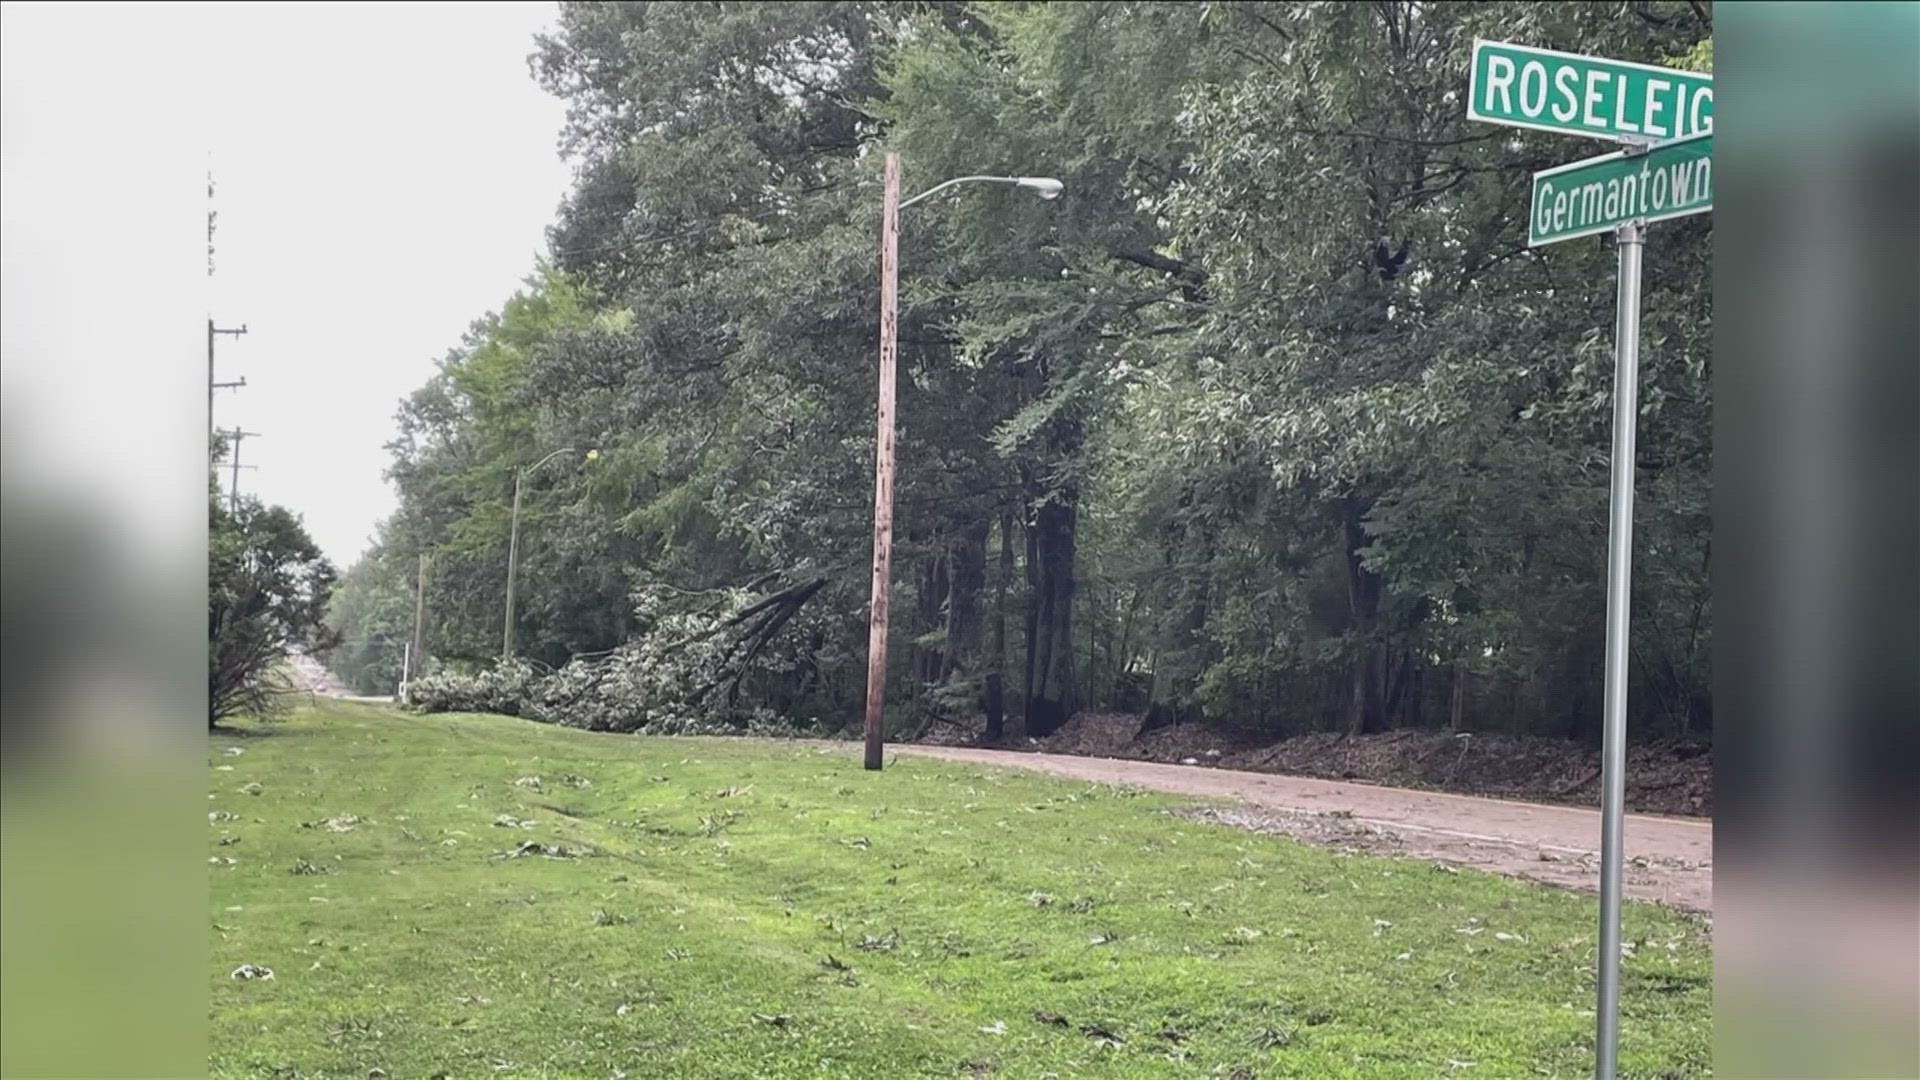 Sunday's thunderstorms onset setbacks for MLGW repair crews who were already working to repair damages and restore outages caused by the first round of thunderstorms